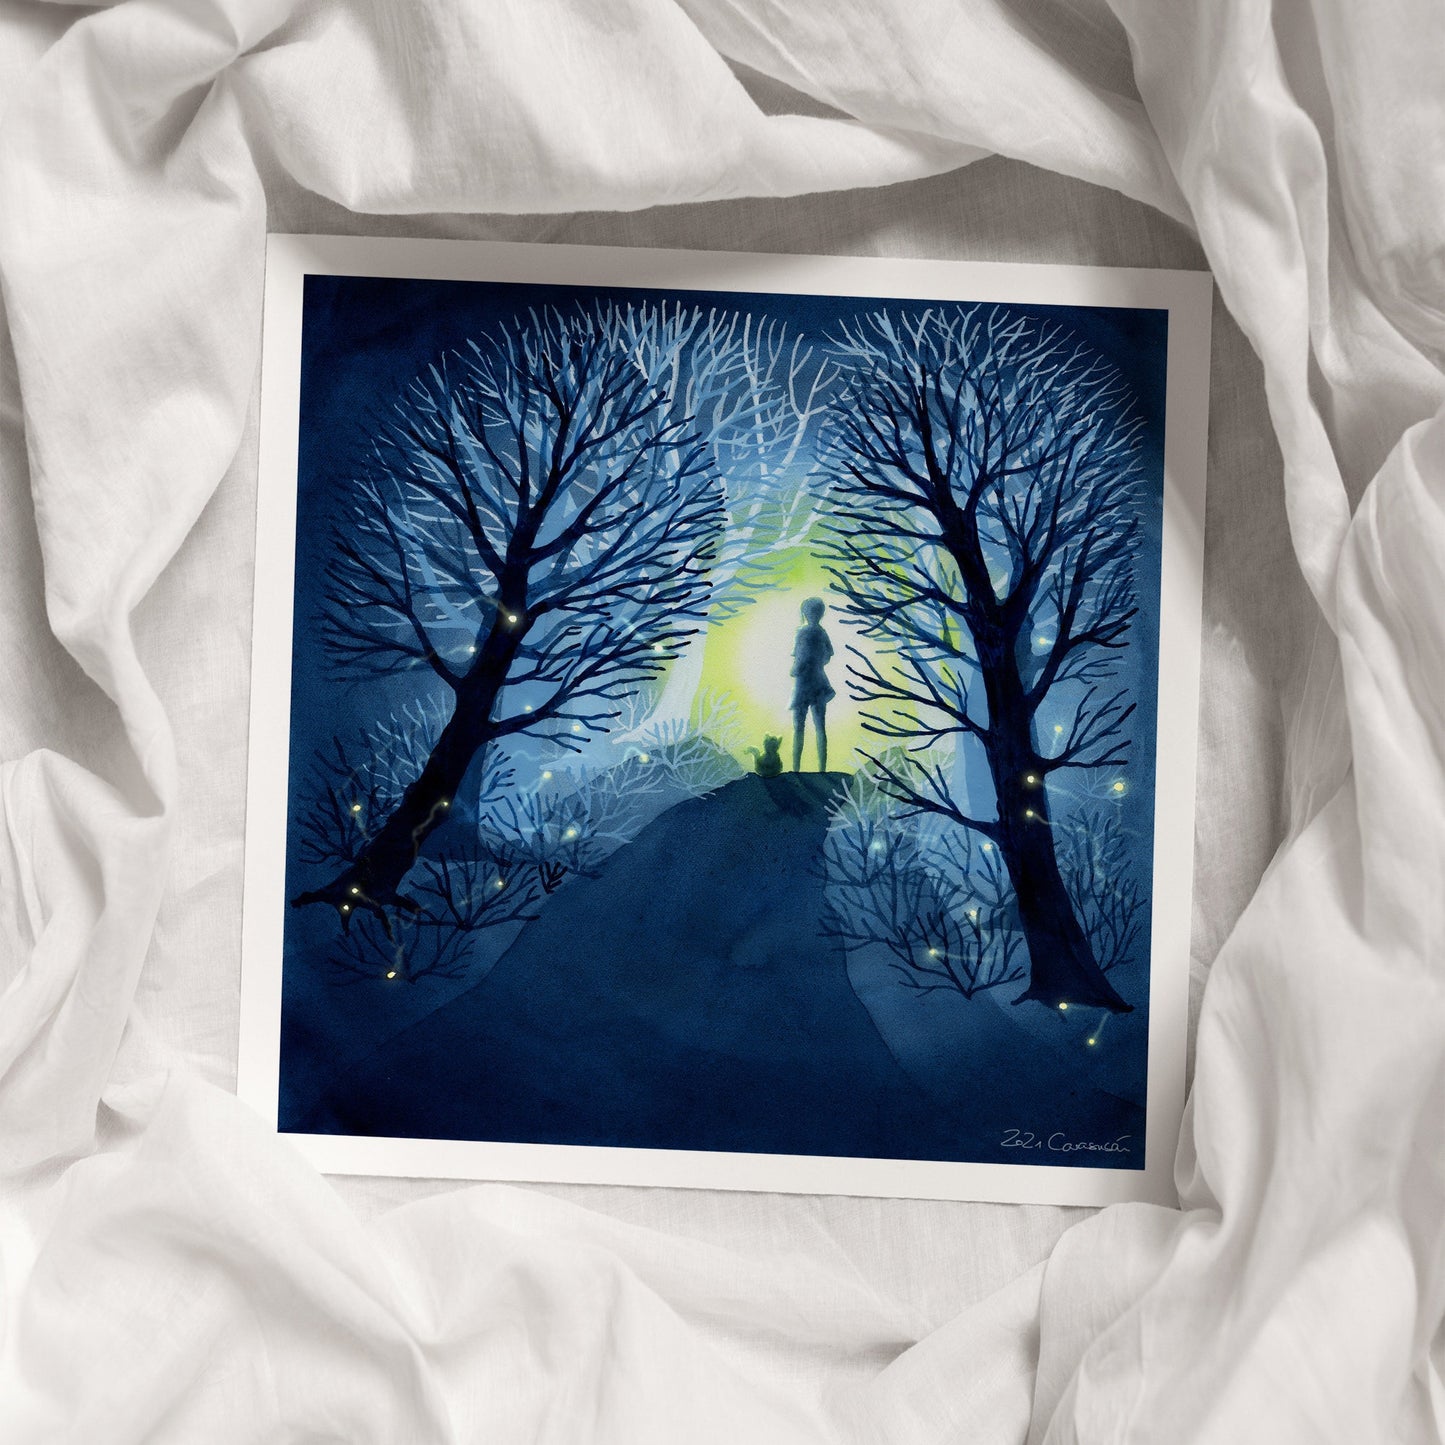 Watercolor 'Fireflies' 30x30cm art print on fine watercolor paper - hand-signed and limited